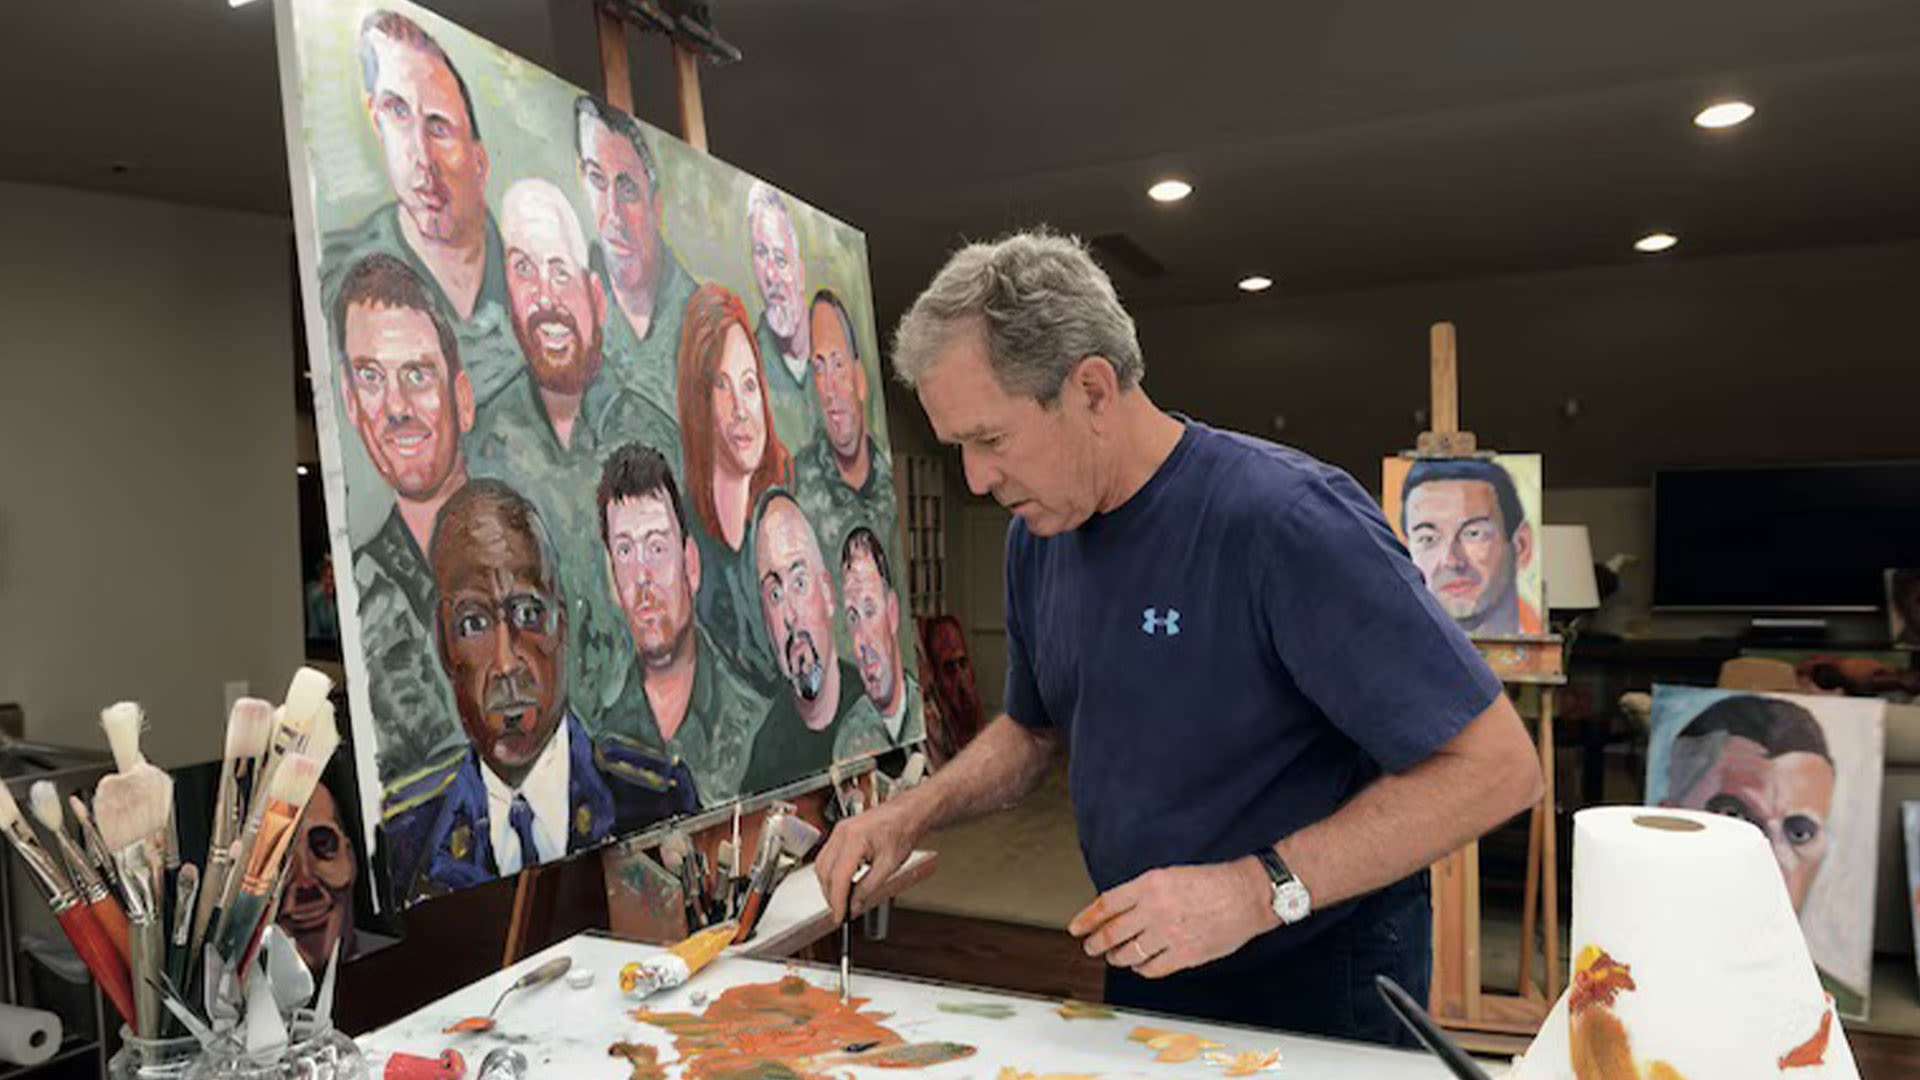 President George W. Bush's paintings to go on display at Epcot this summer